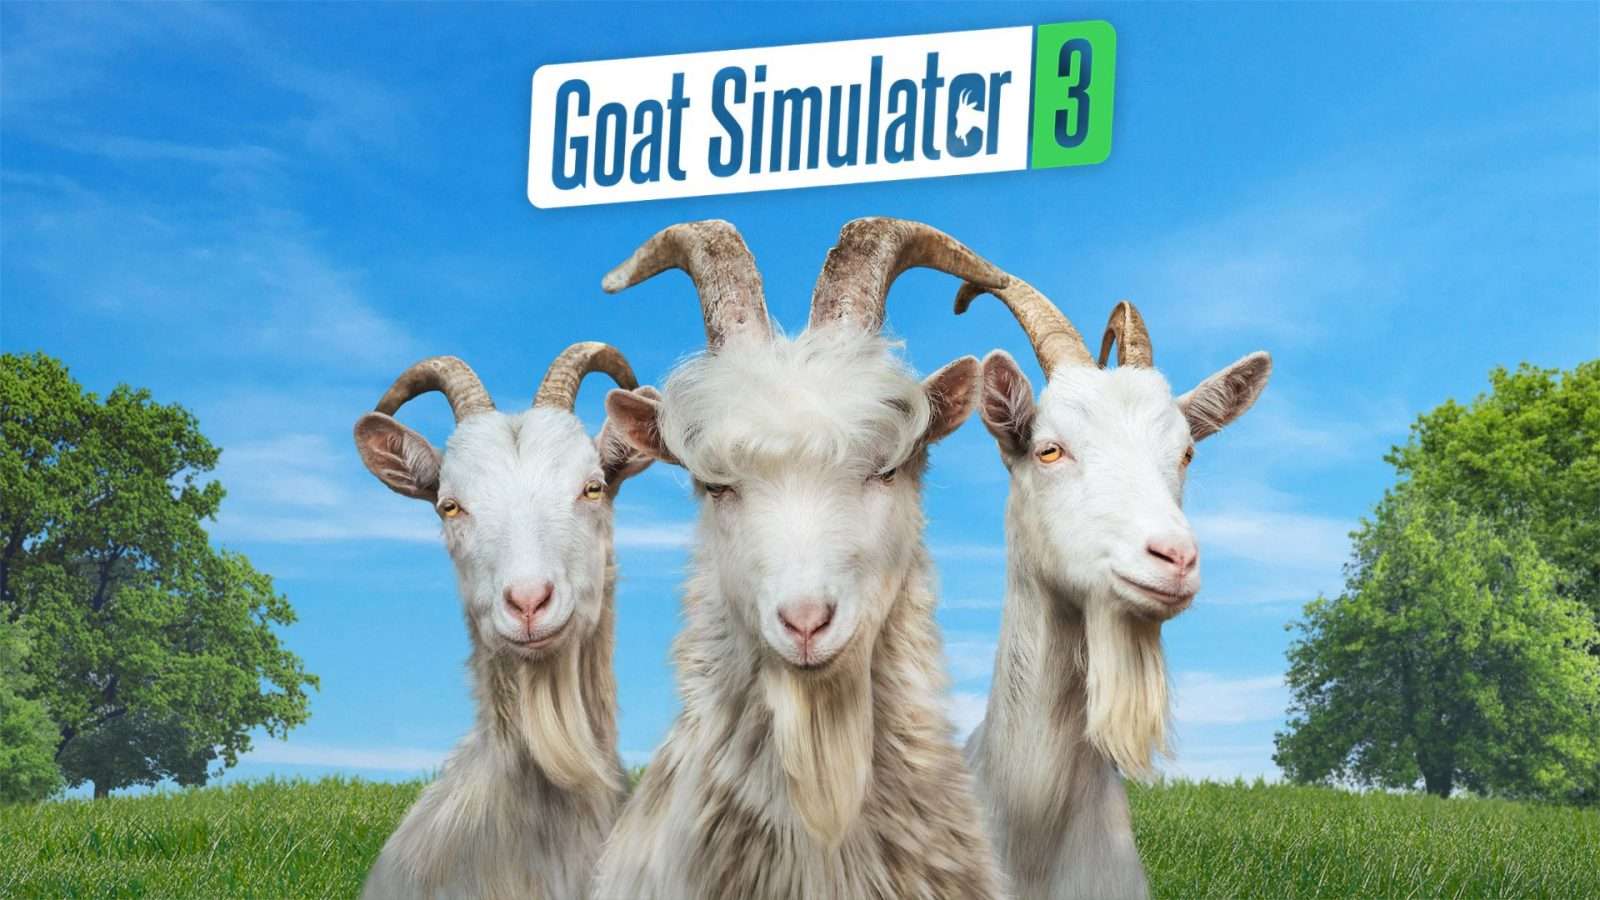 goats on official goat simulator 3 cover art